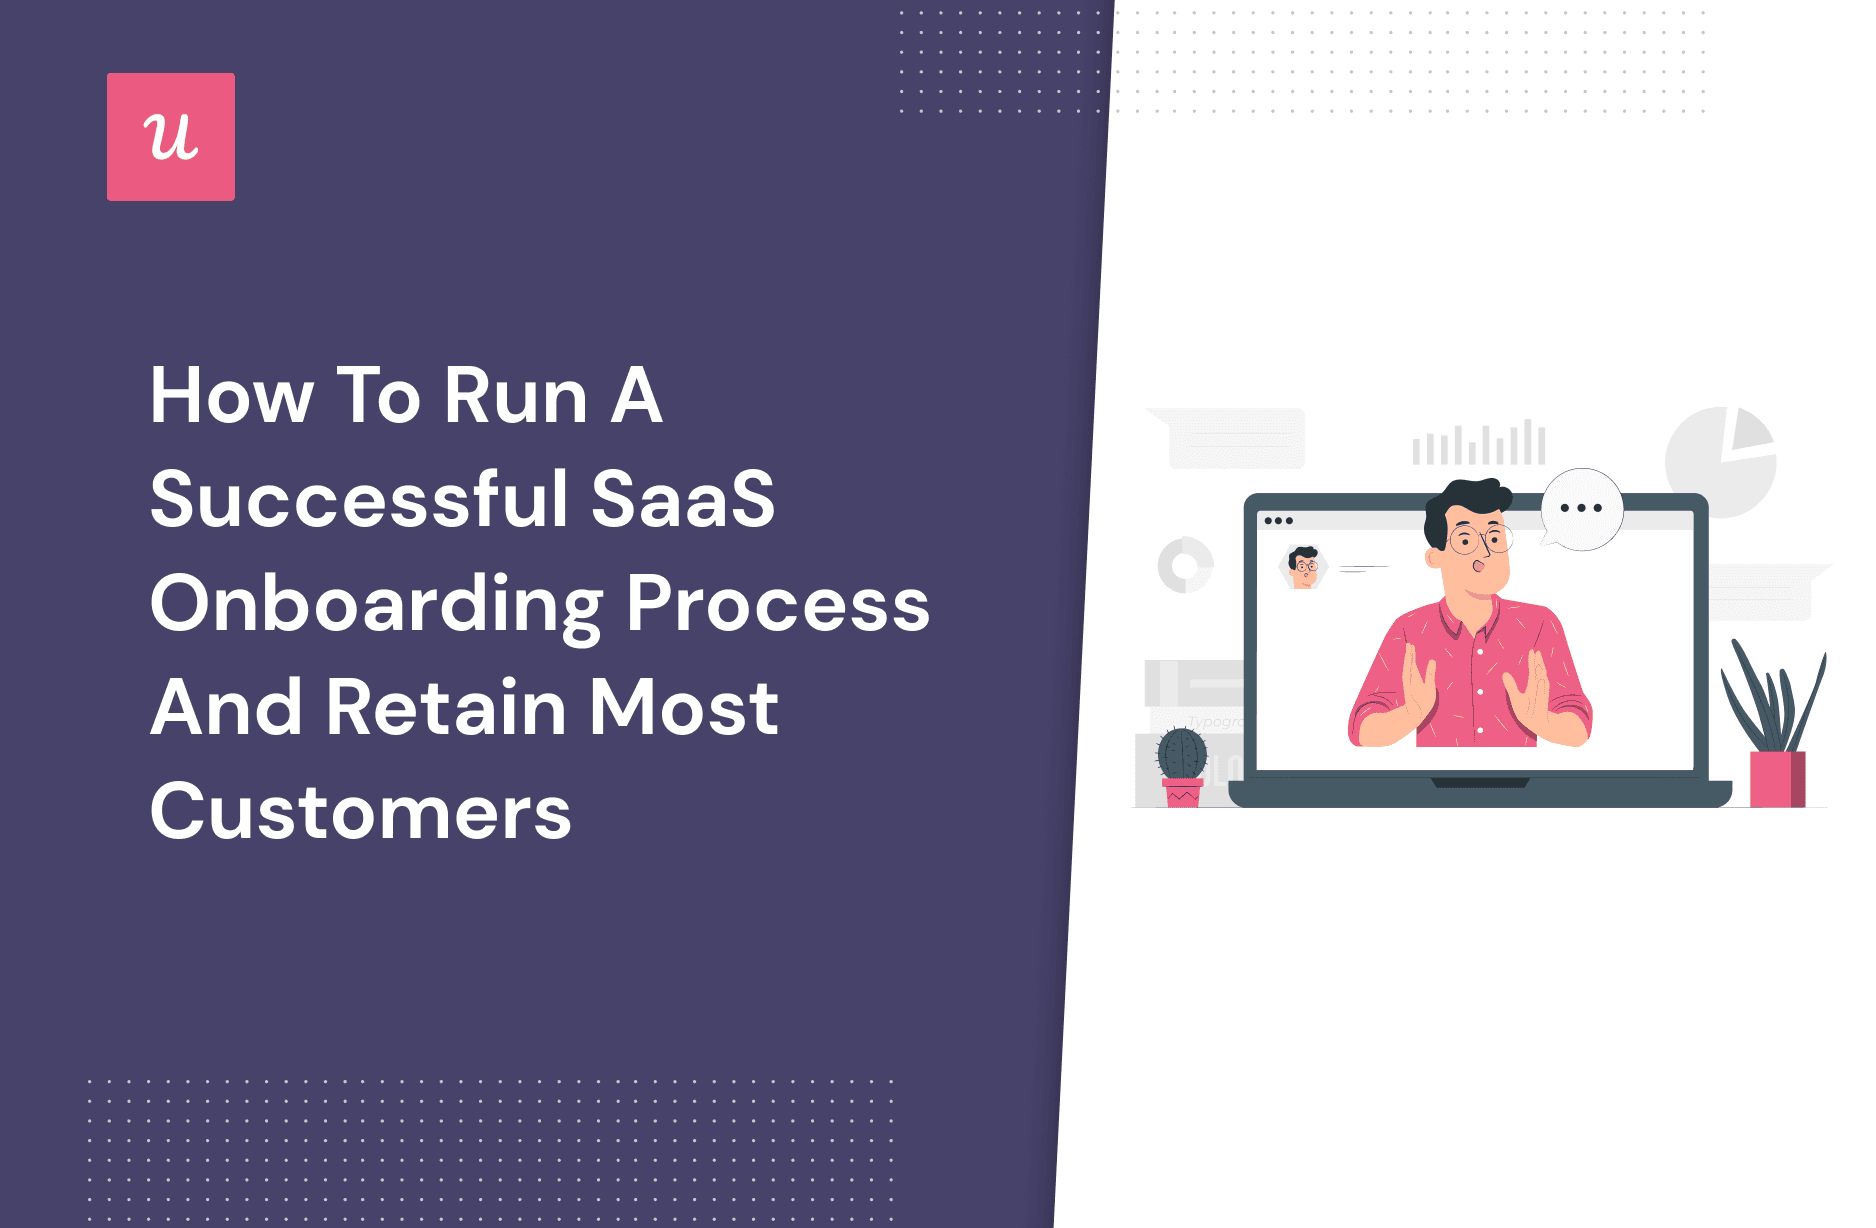 How To Run a Successful SaaS Onboarding Process and Retain Most Customers cover